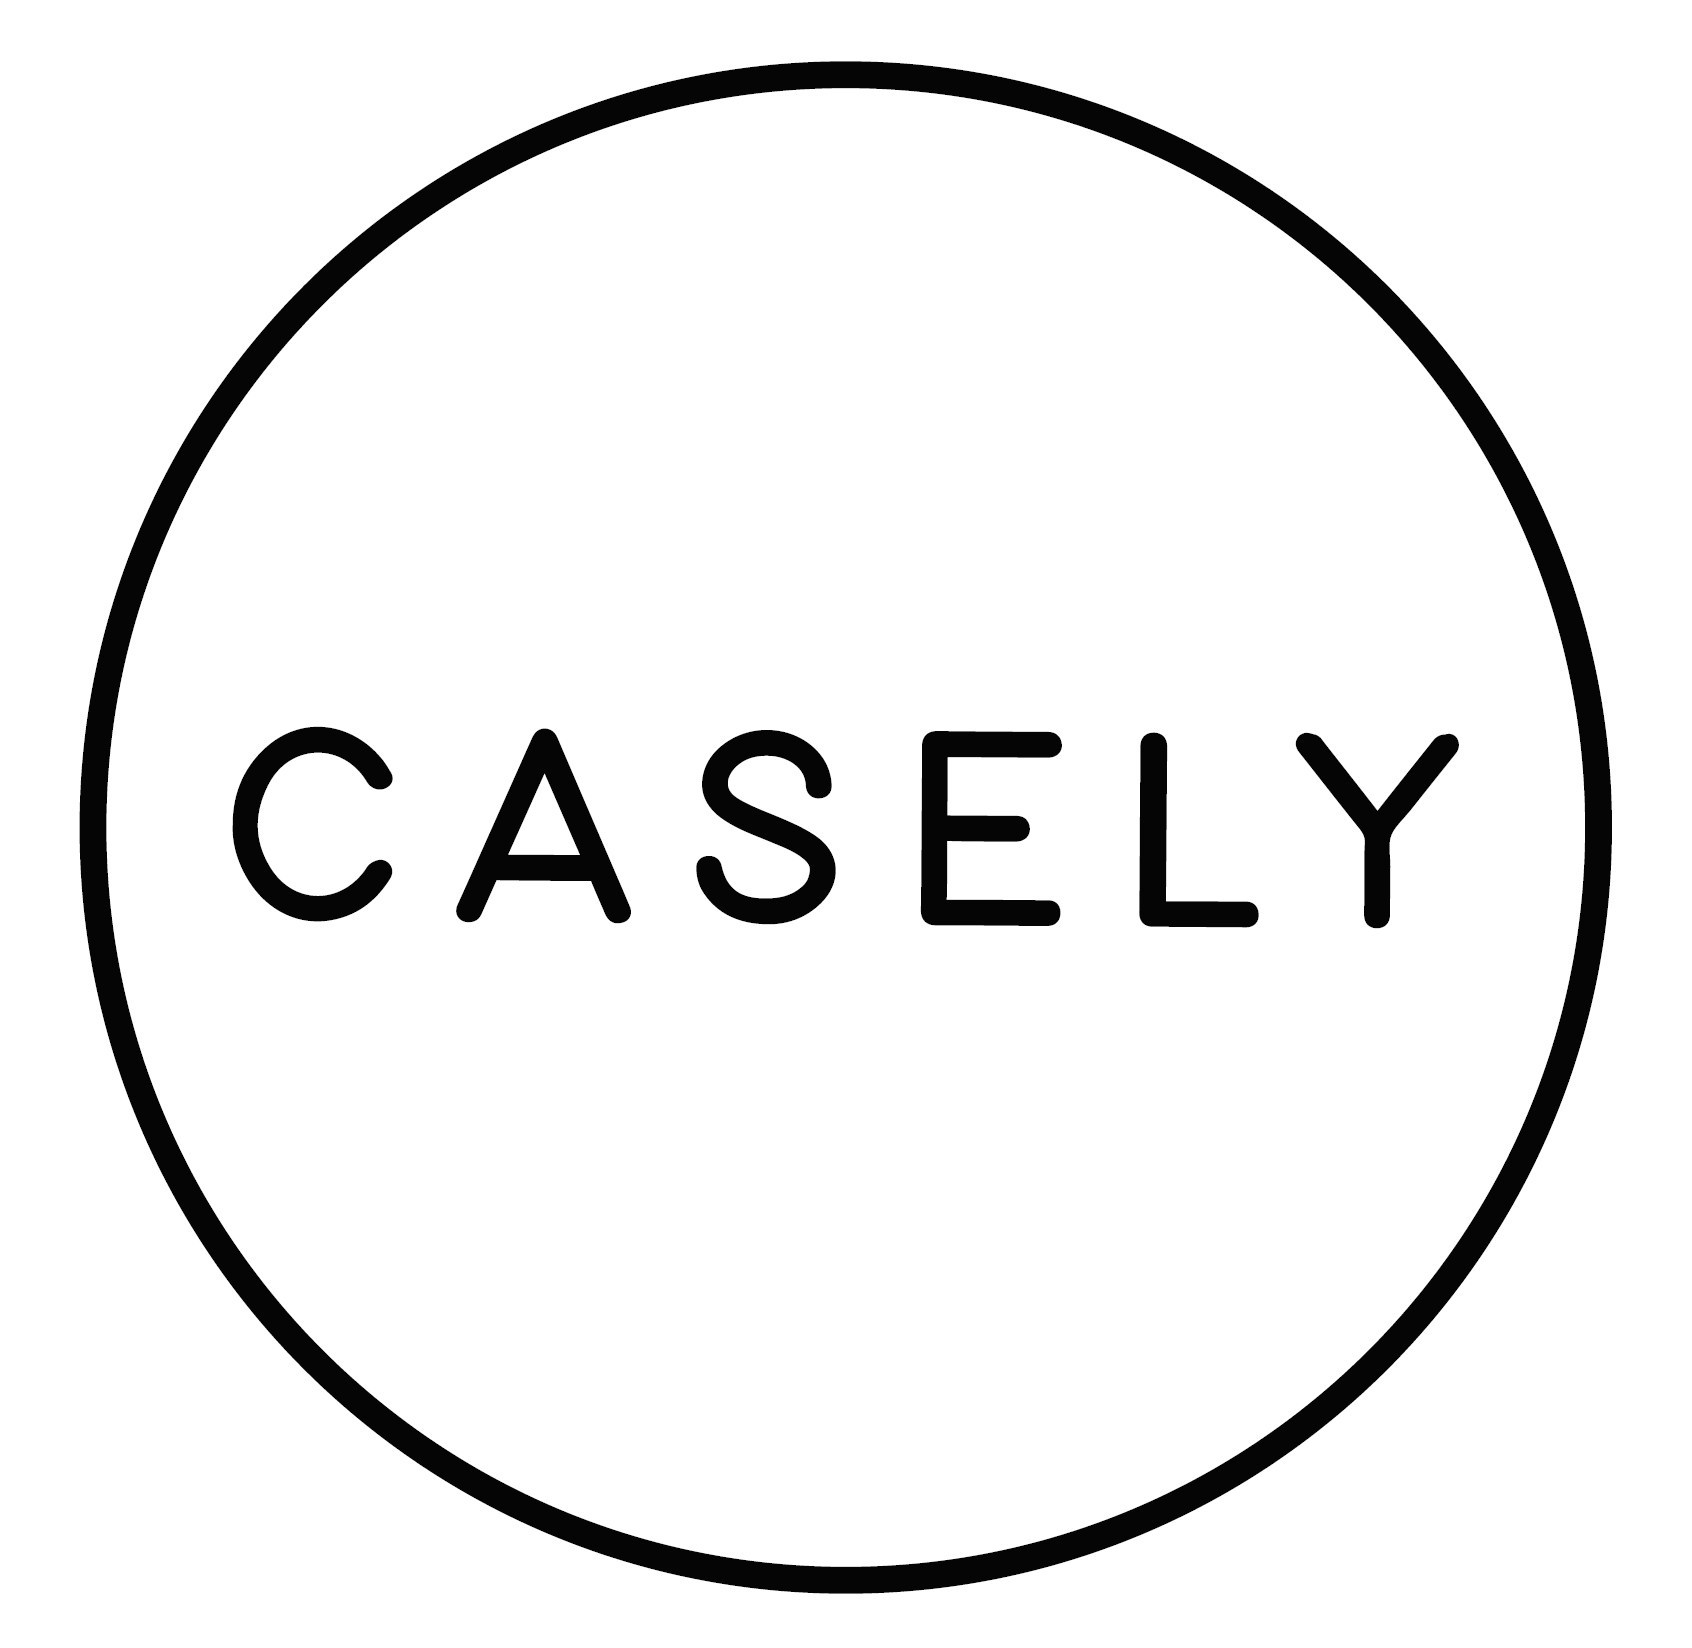 30% Off With Casely Voucher Code